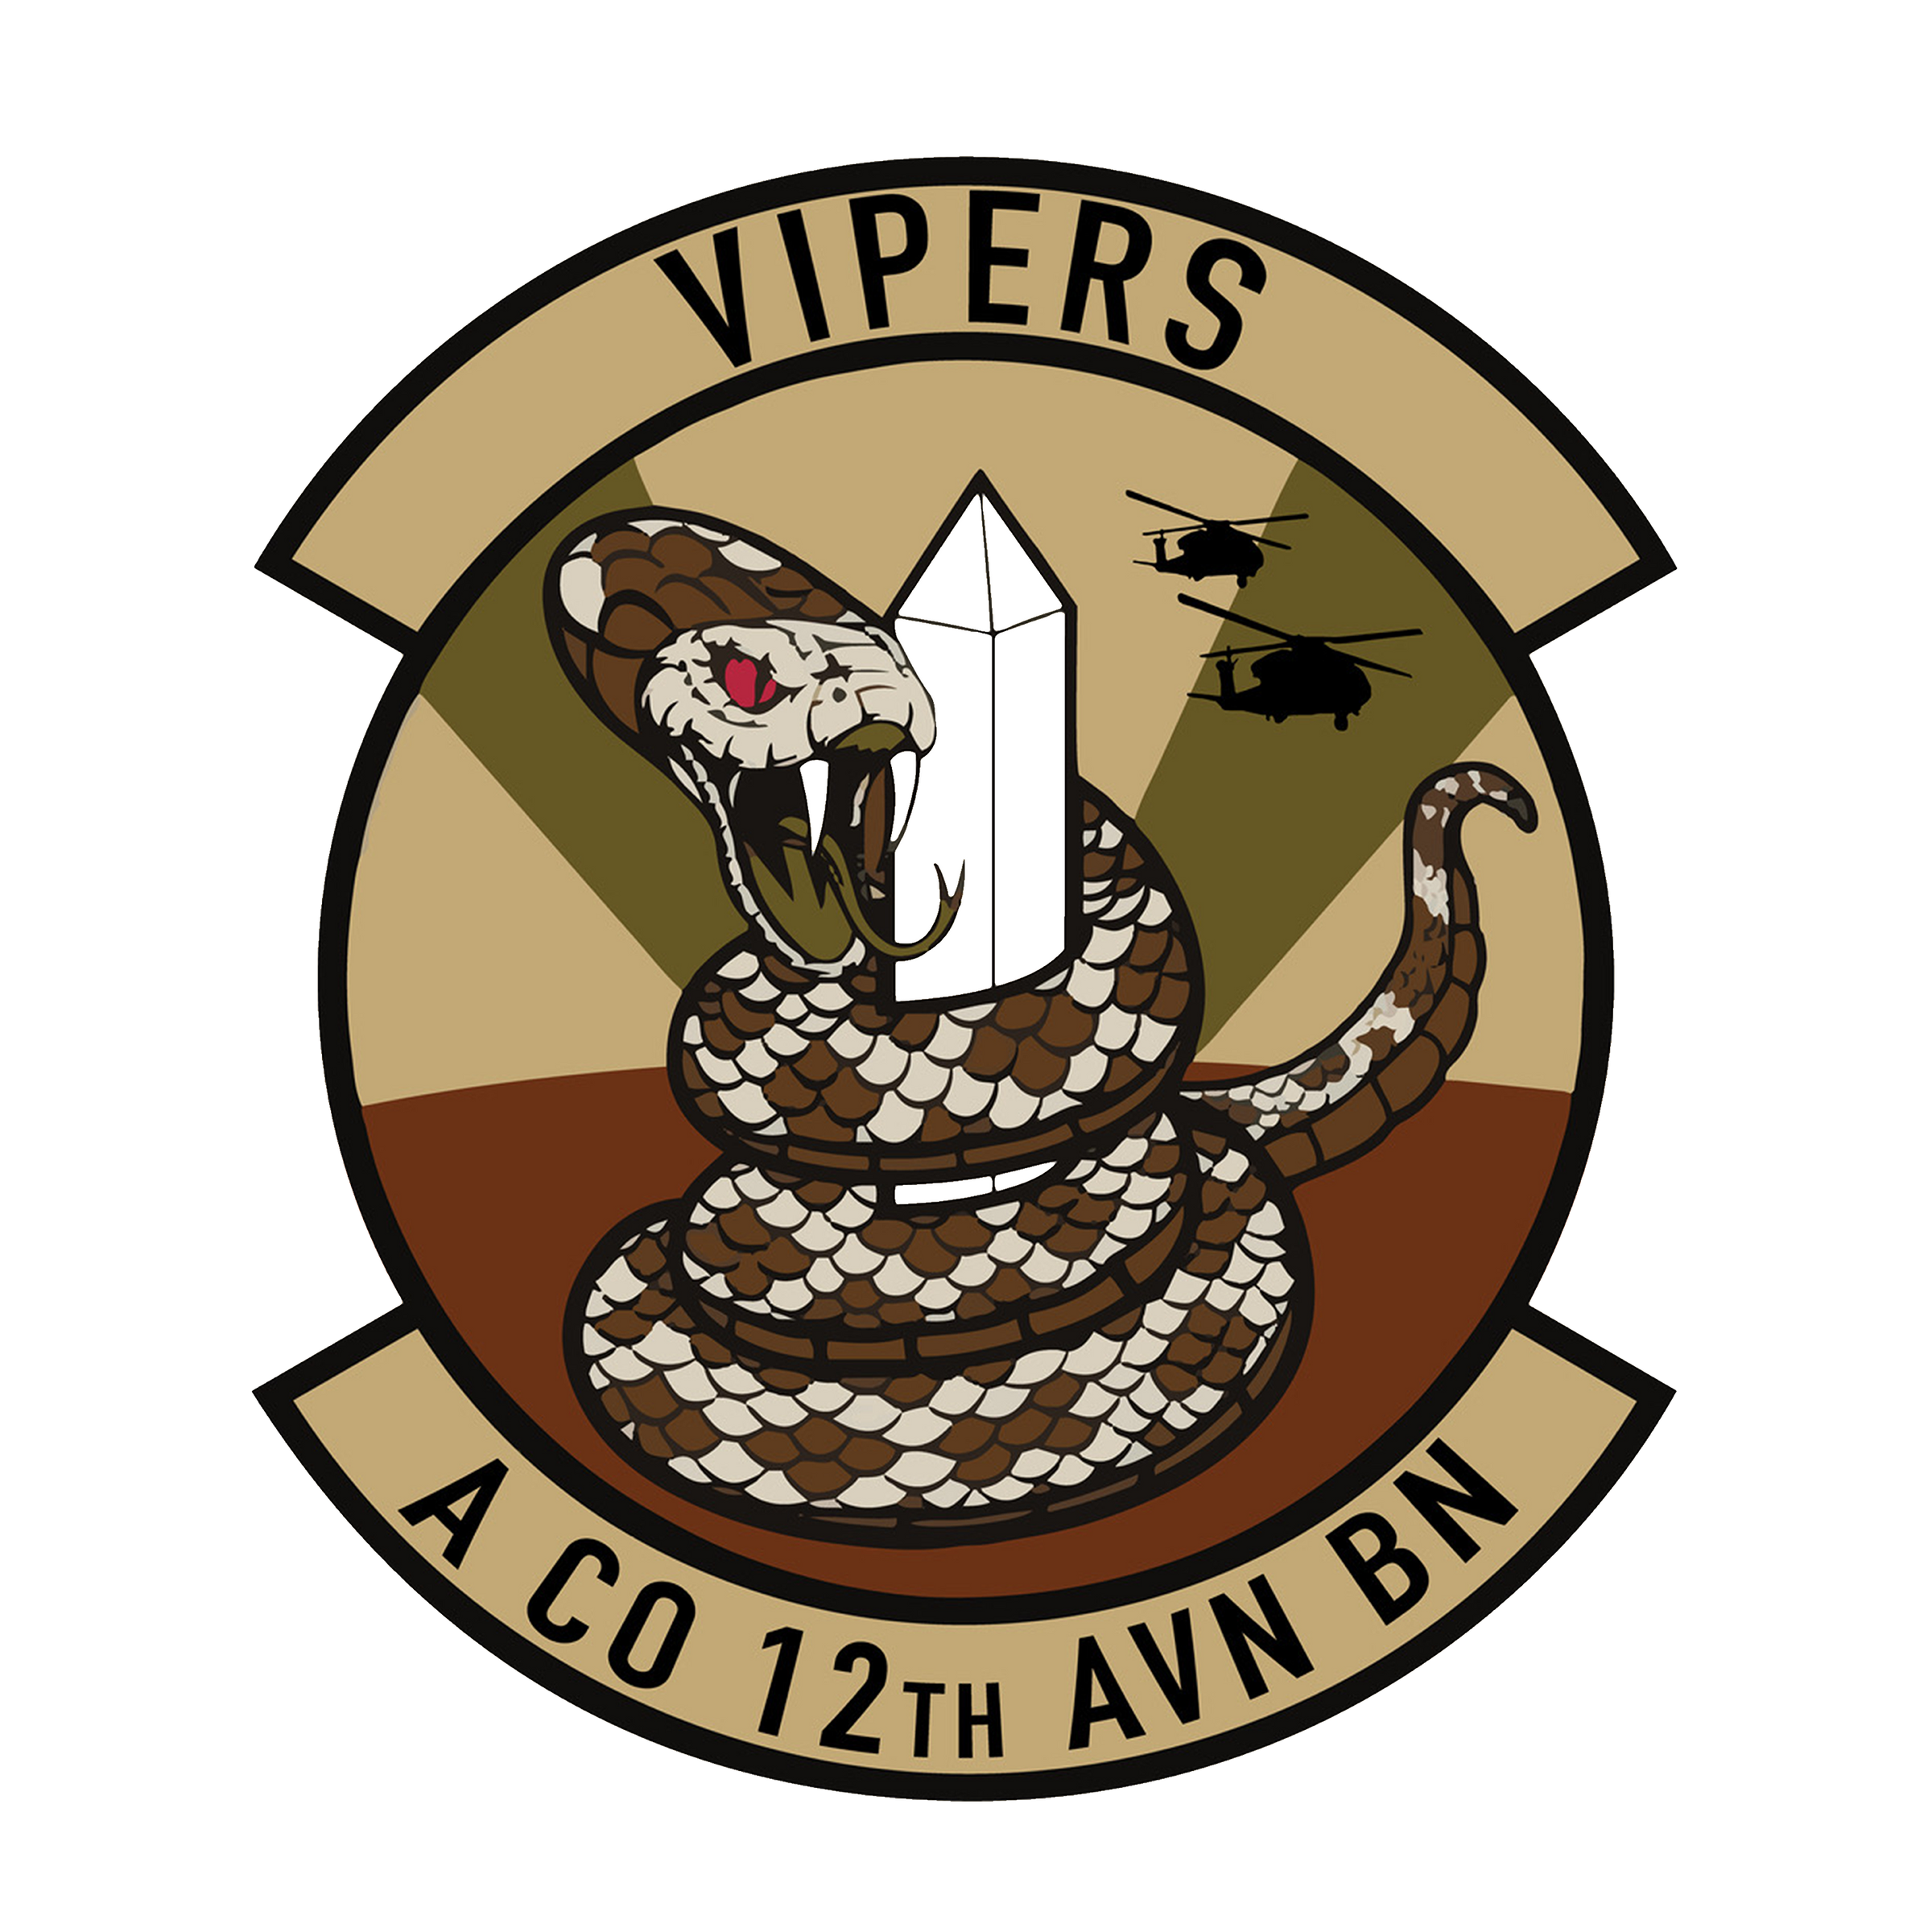 A Co, 12 AVN BN "Vipers"